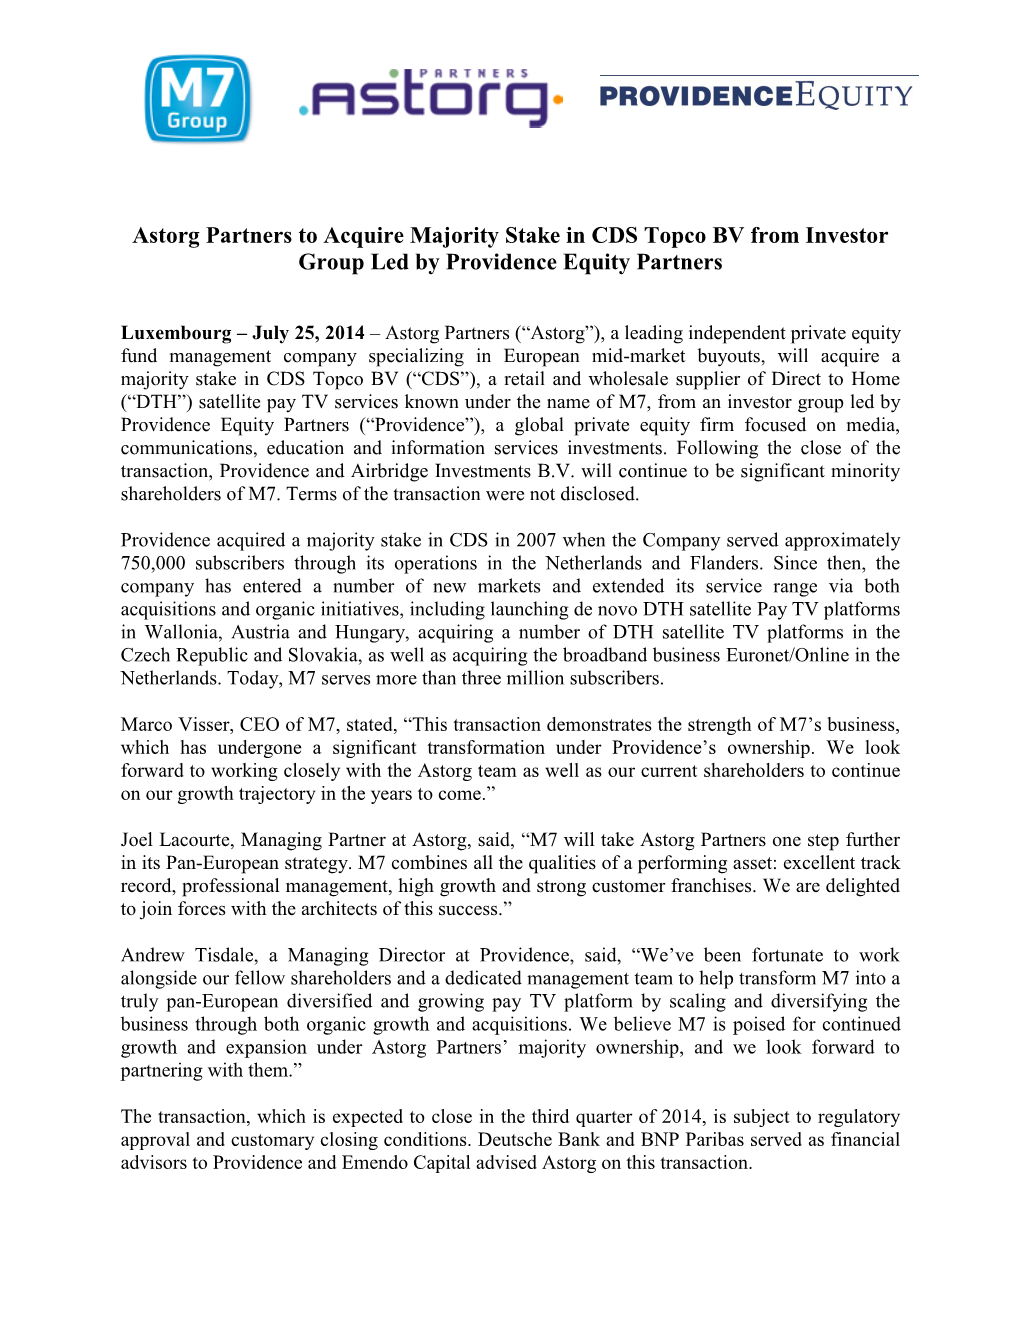 Astorg Partners to Acquire Majority Stake in CDS Topco BV from Investor Group Led by Providence Equity Partners